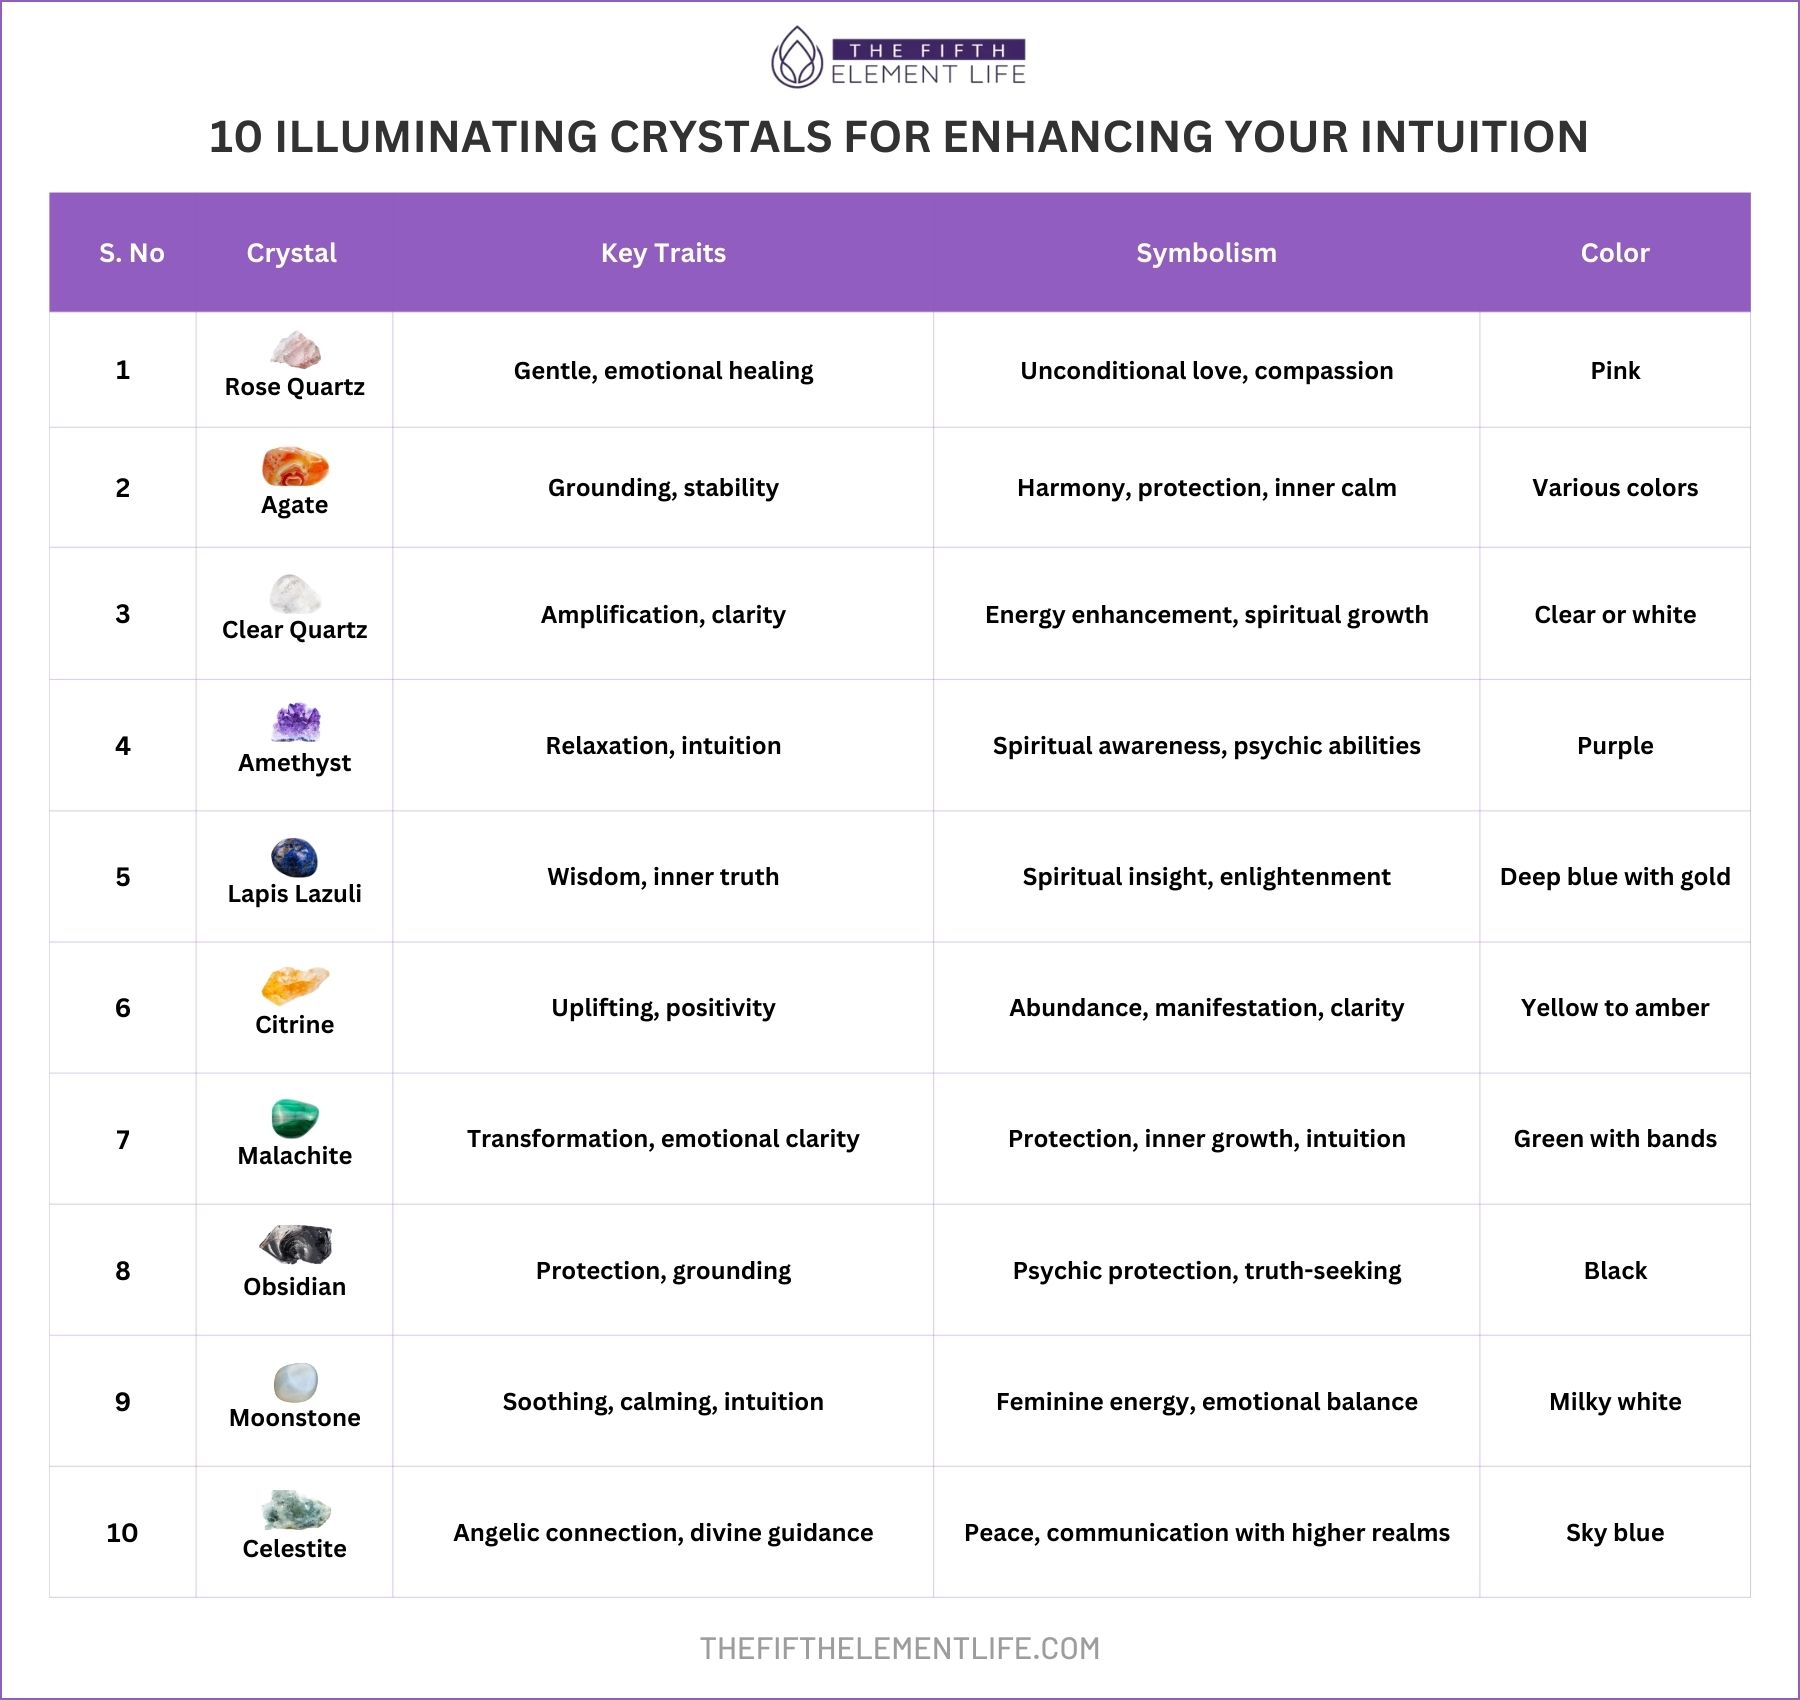 10 Illuminating Crystals For Enhancing Your Intuition